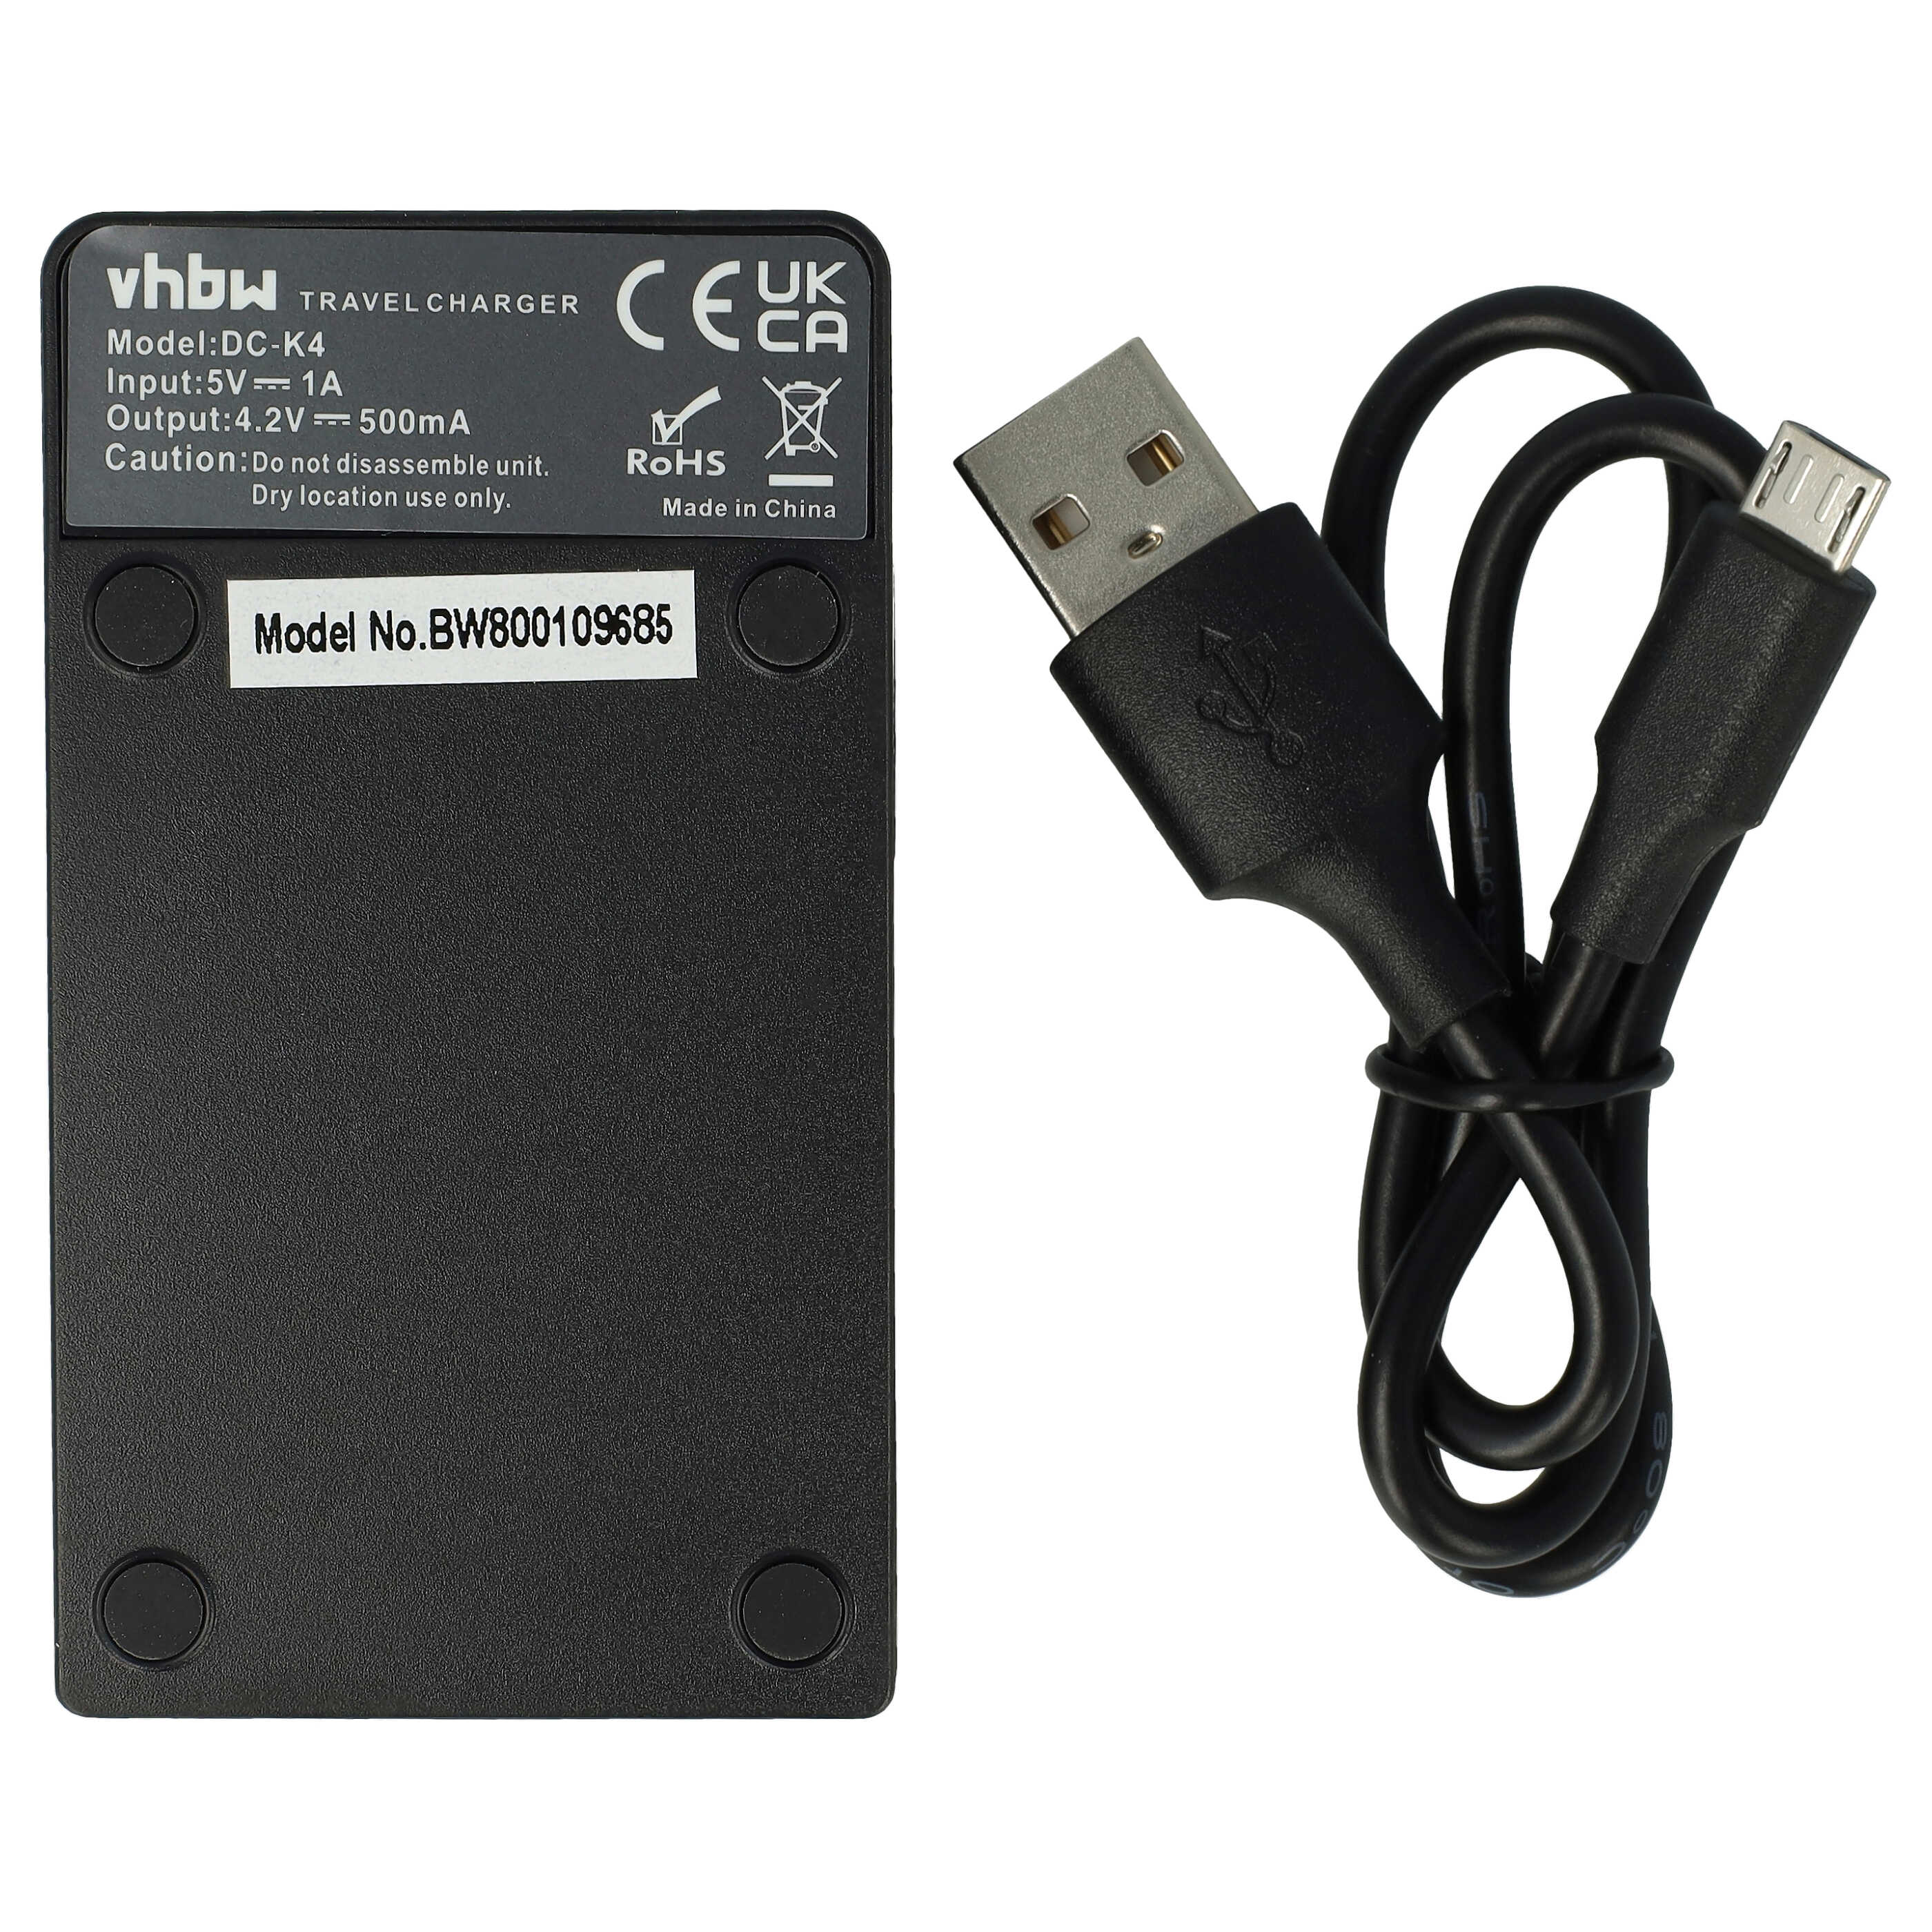 Battery Charger replaces Nikon MH-66 suitable for Coolpix W100 Camera etc. - 0.5 A, 4.2 V